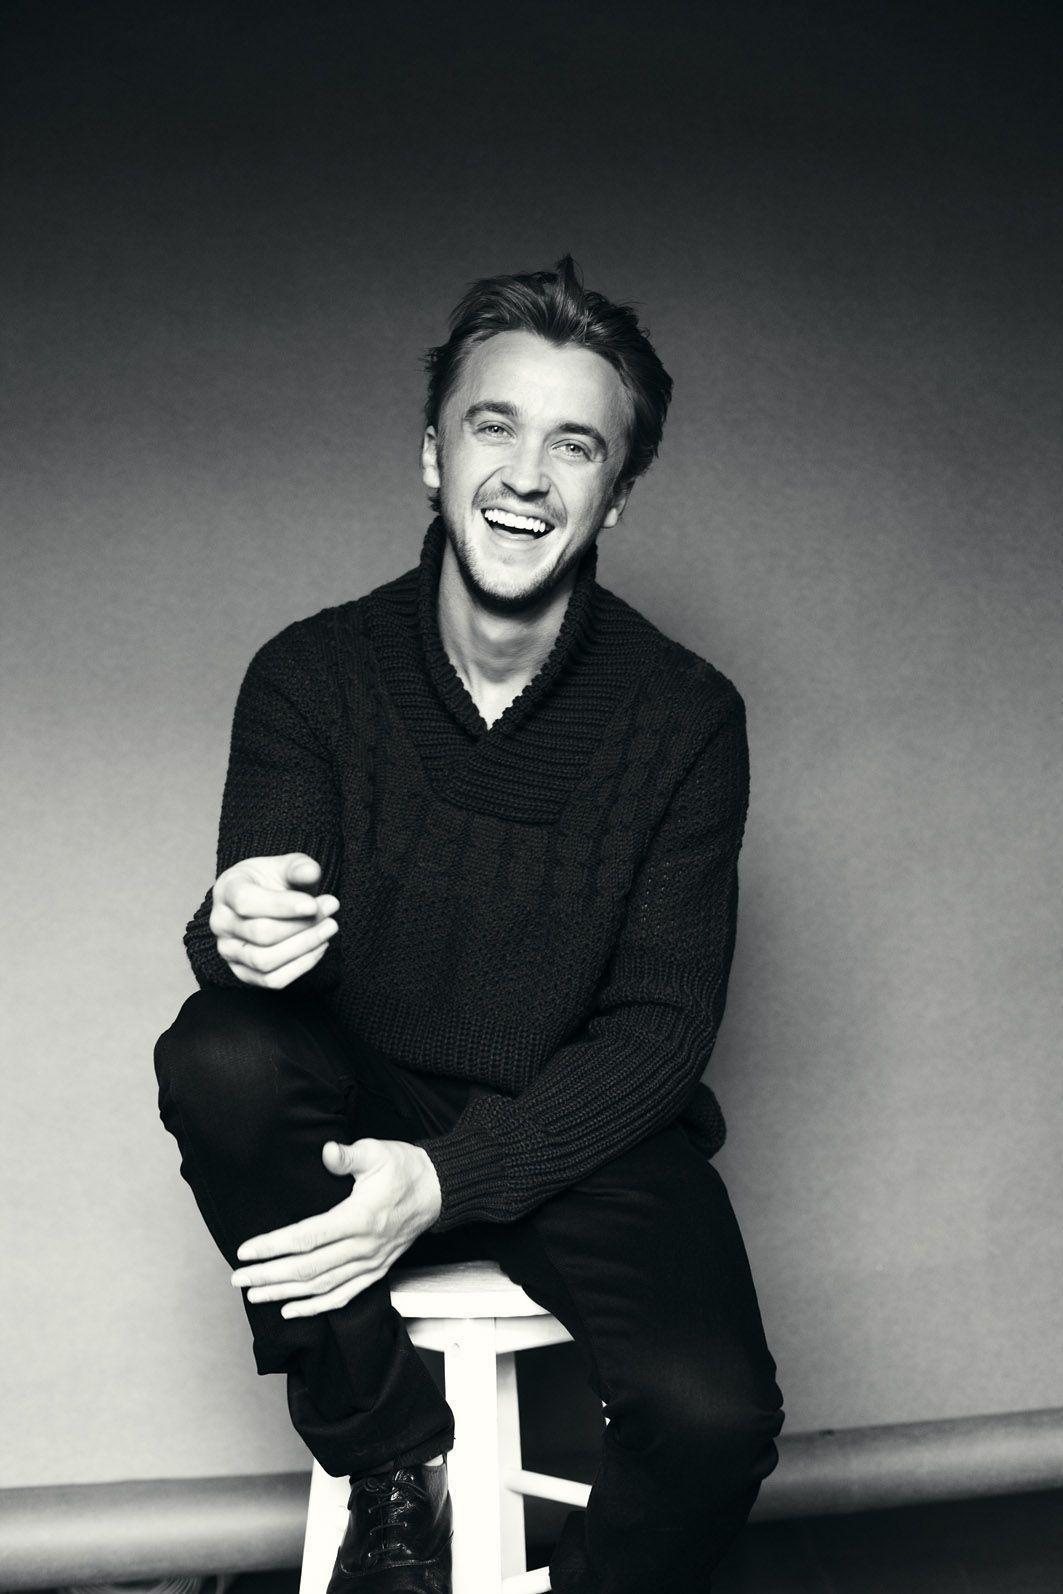 Tom Felton. And when I was little people wondered why I liked